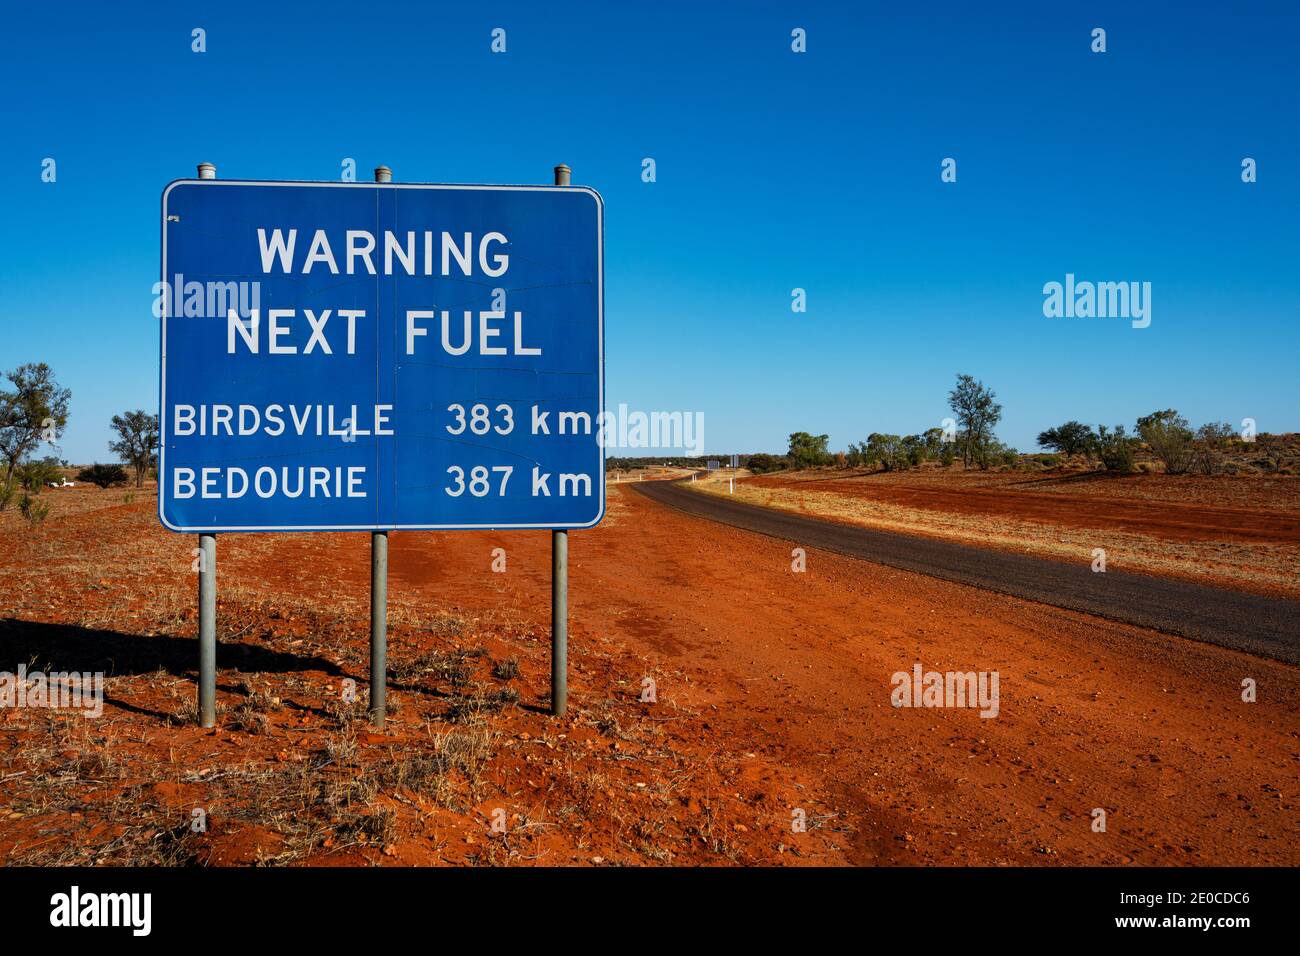 Typical road sign in the remote australian outback areas. Stock Photo